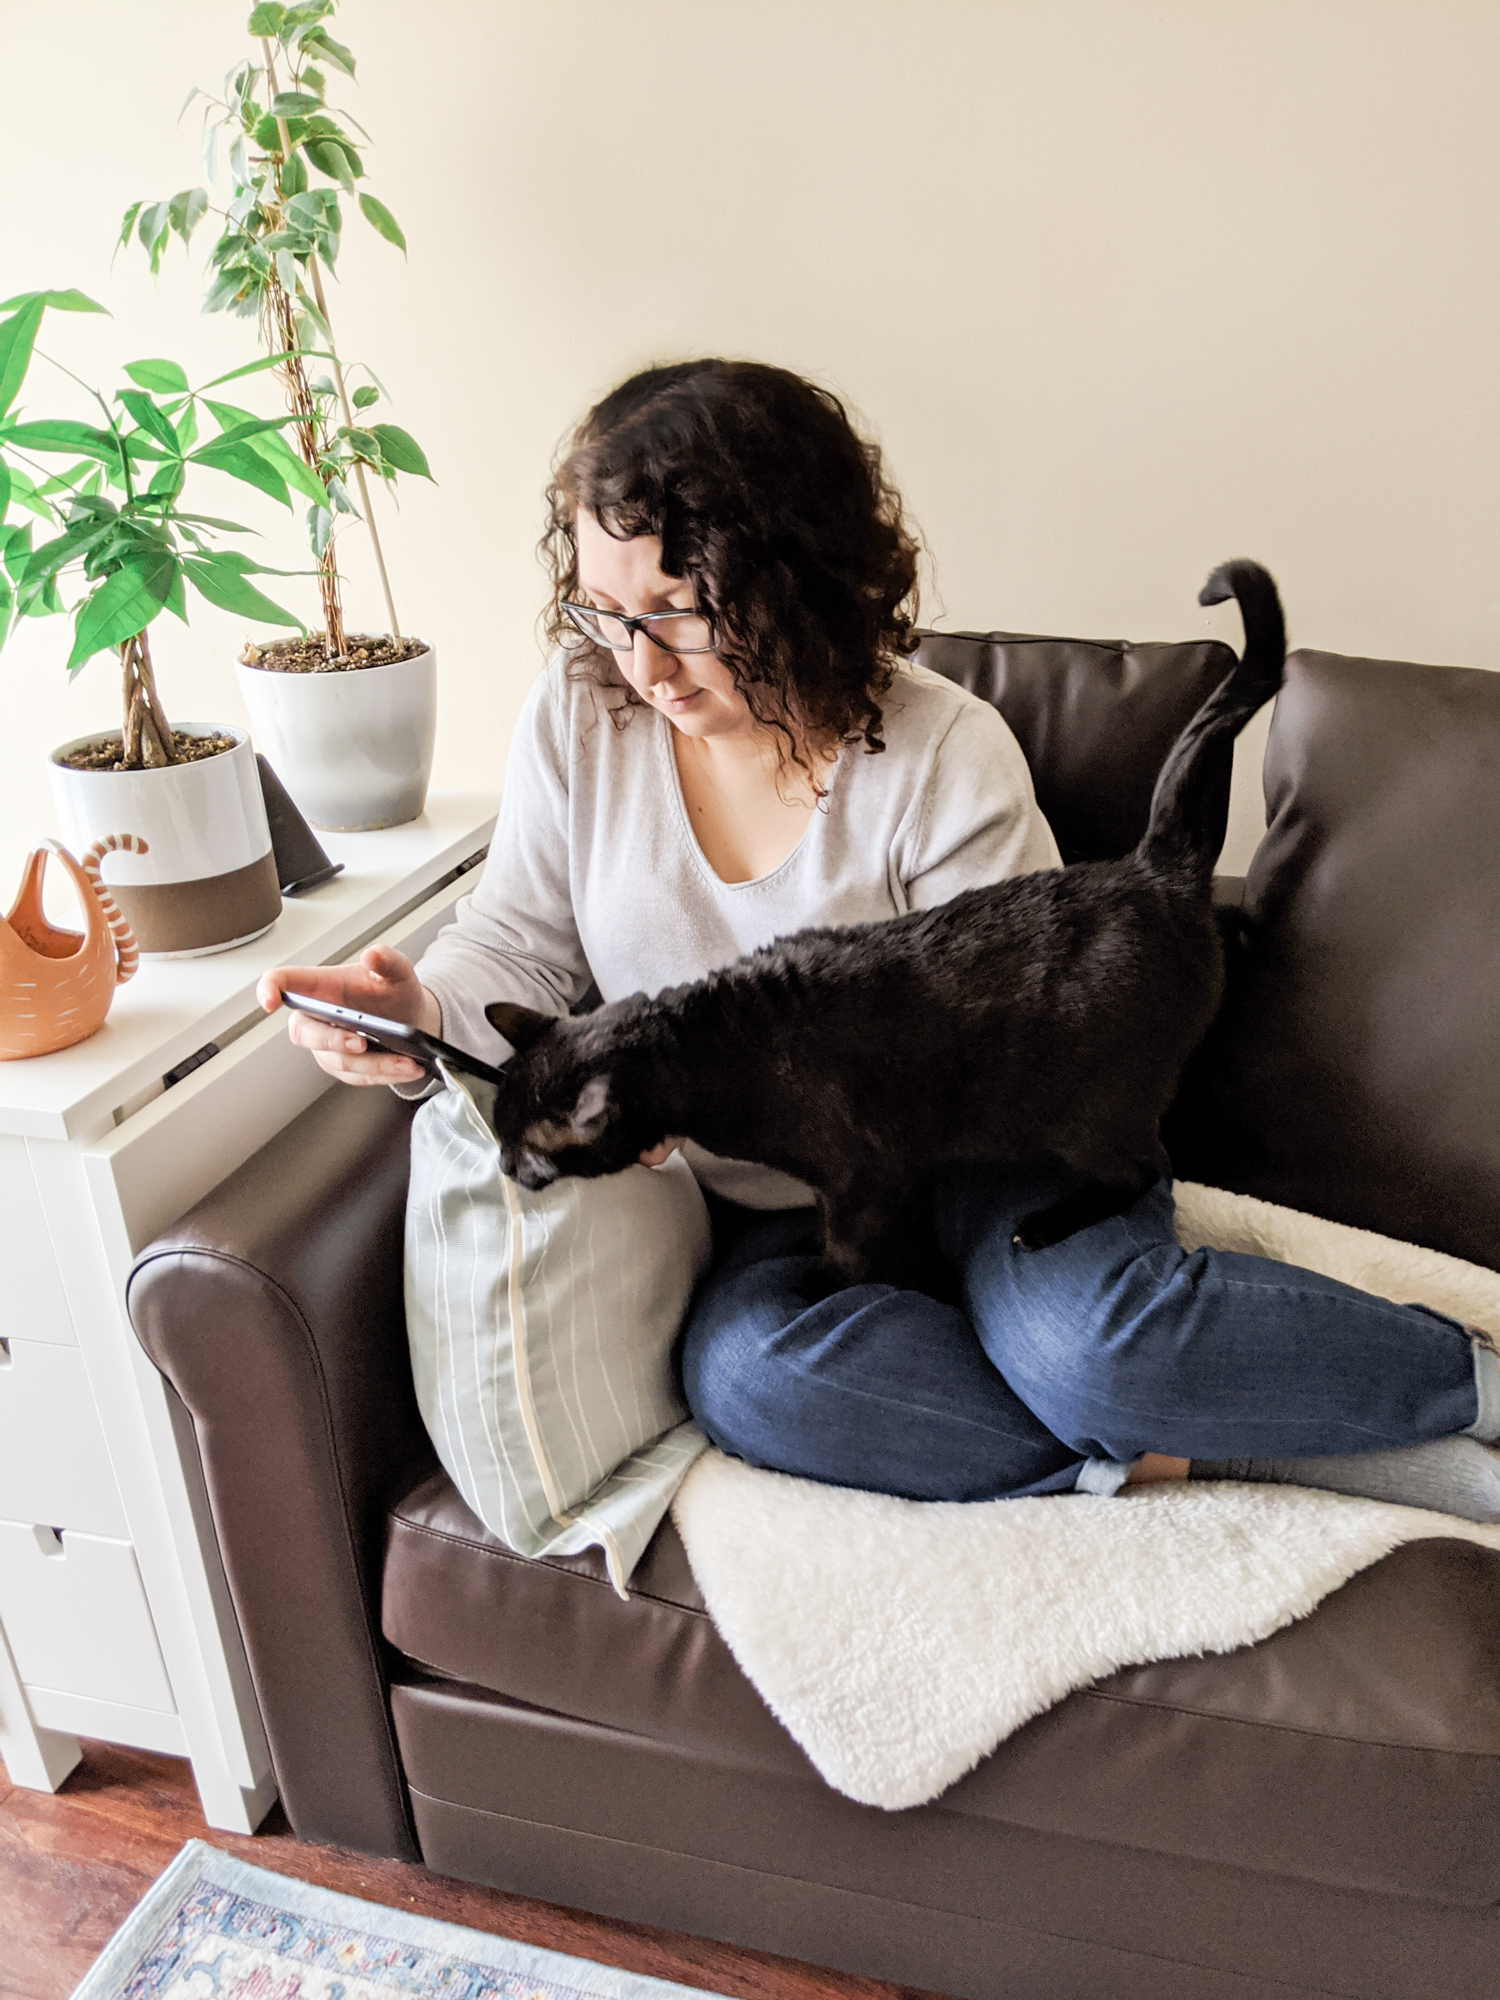 Web designer working on a tablet with her cat